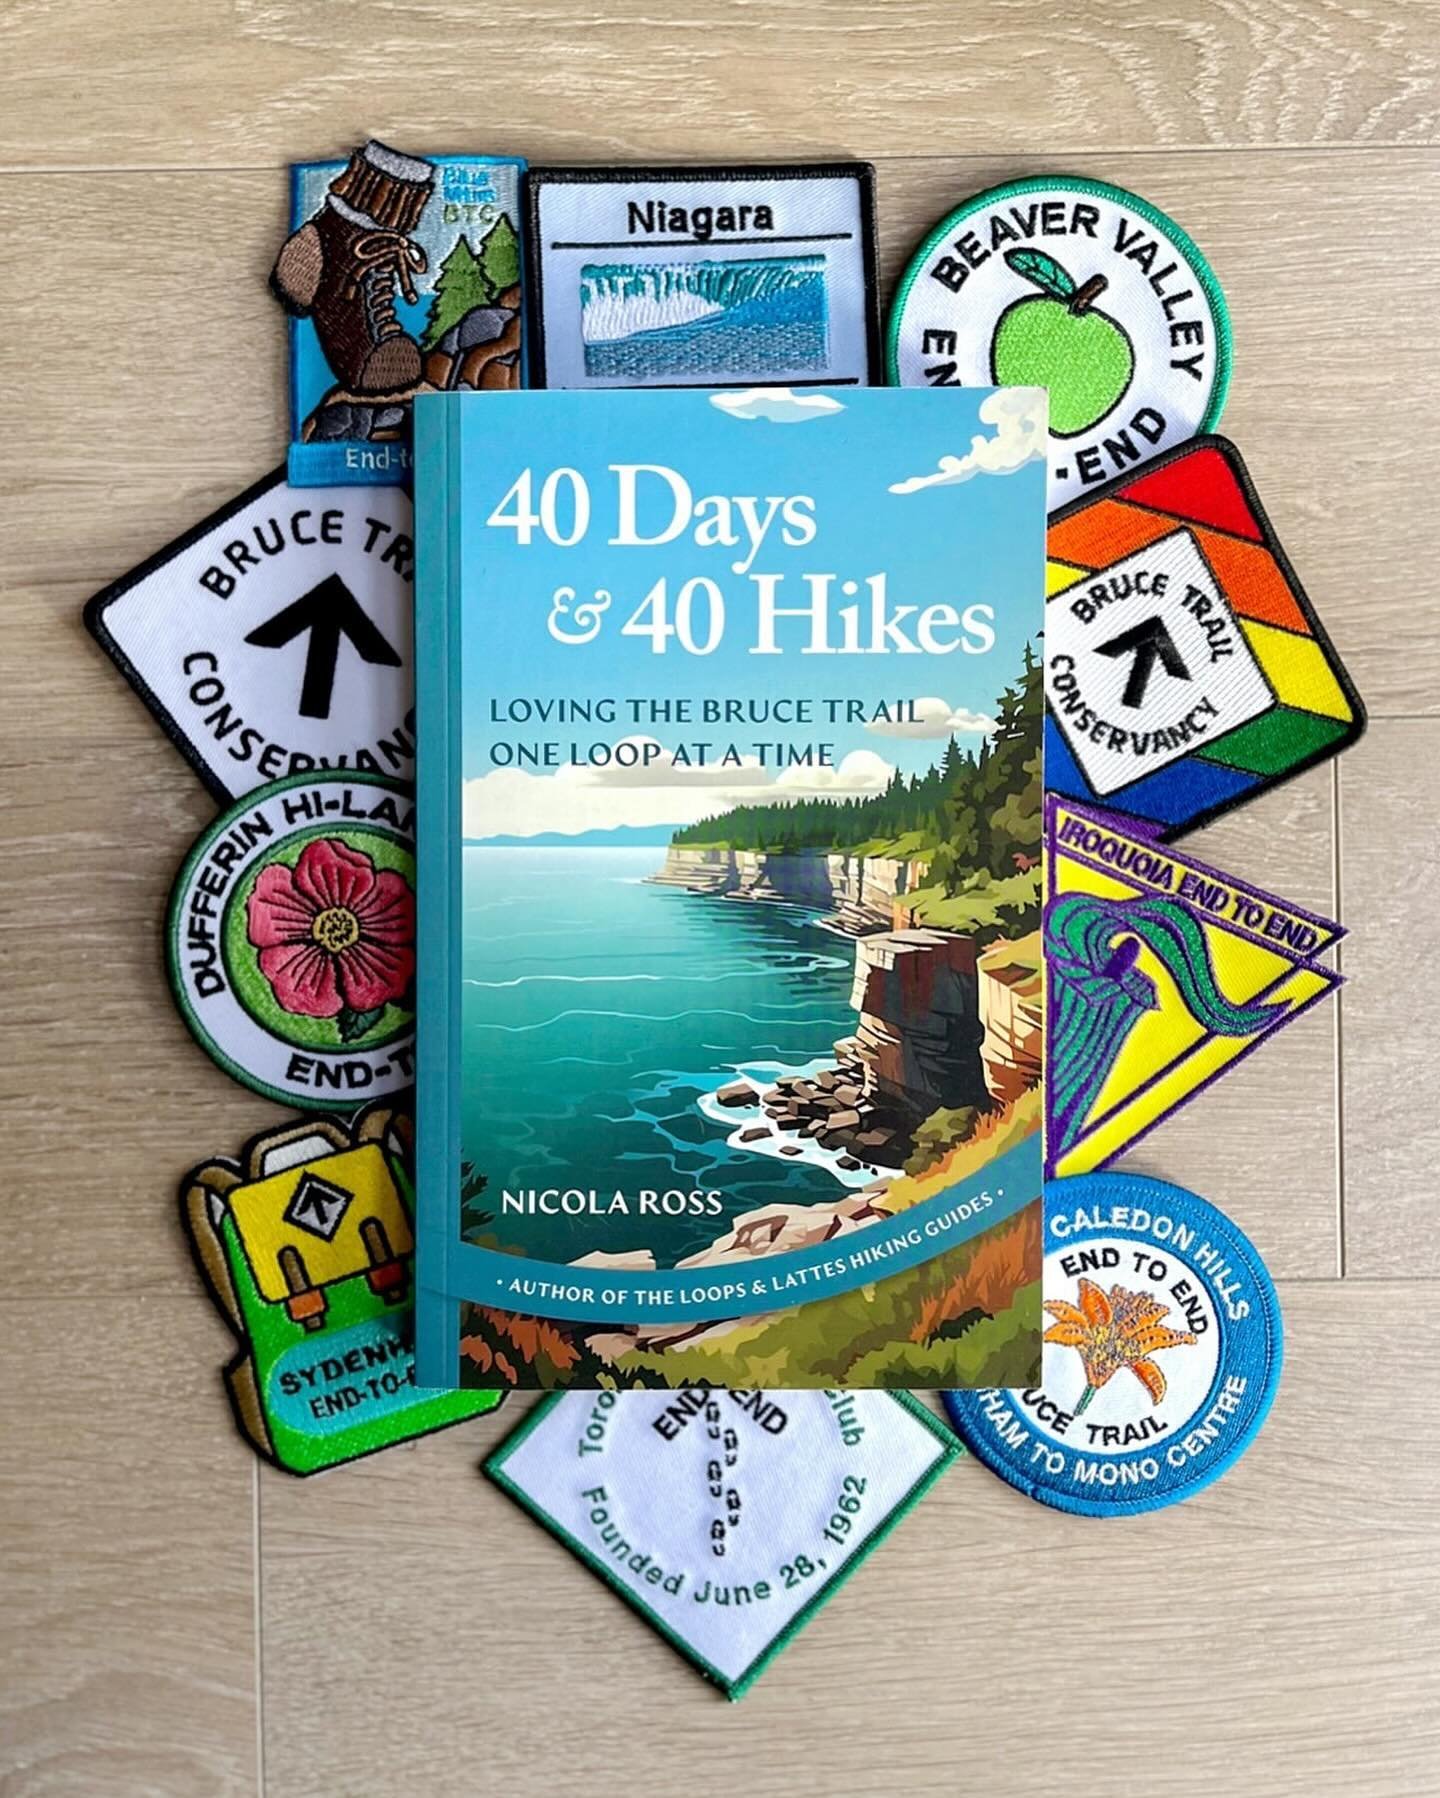 The heat is on! Stock up on 40 Days &amp; 40 Hikes : Loving the Bruce Trail One Loop at a Time by Nicola Ross. A travelogue and friendly guide to hiking the Bruce Trail in an unconventional way - as a series of day-hike loops. Perfect for hikers, non